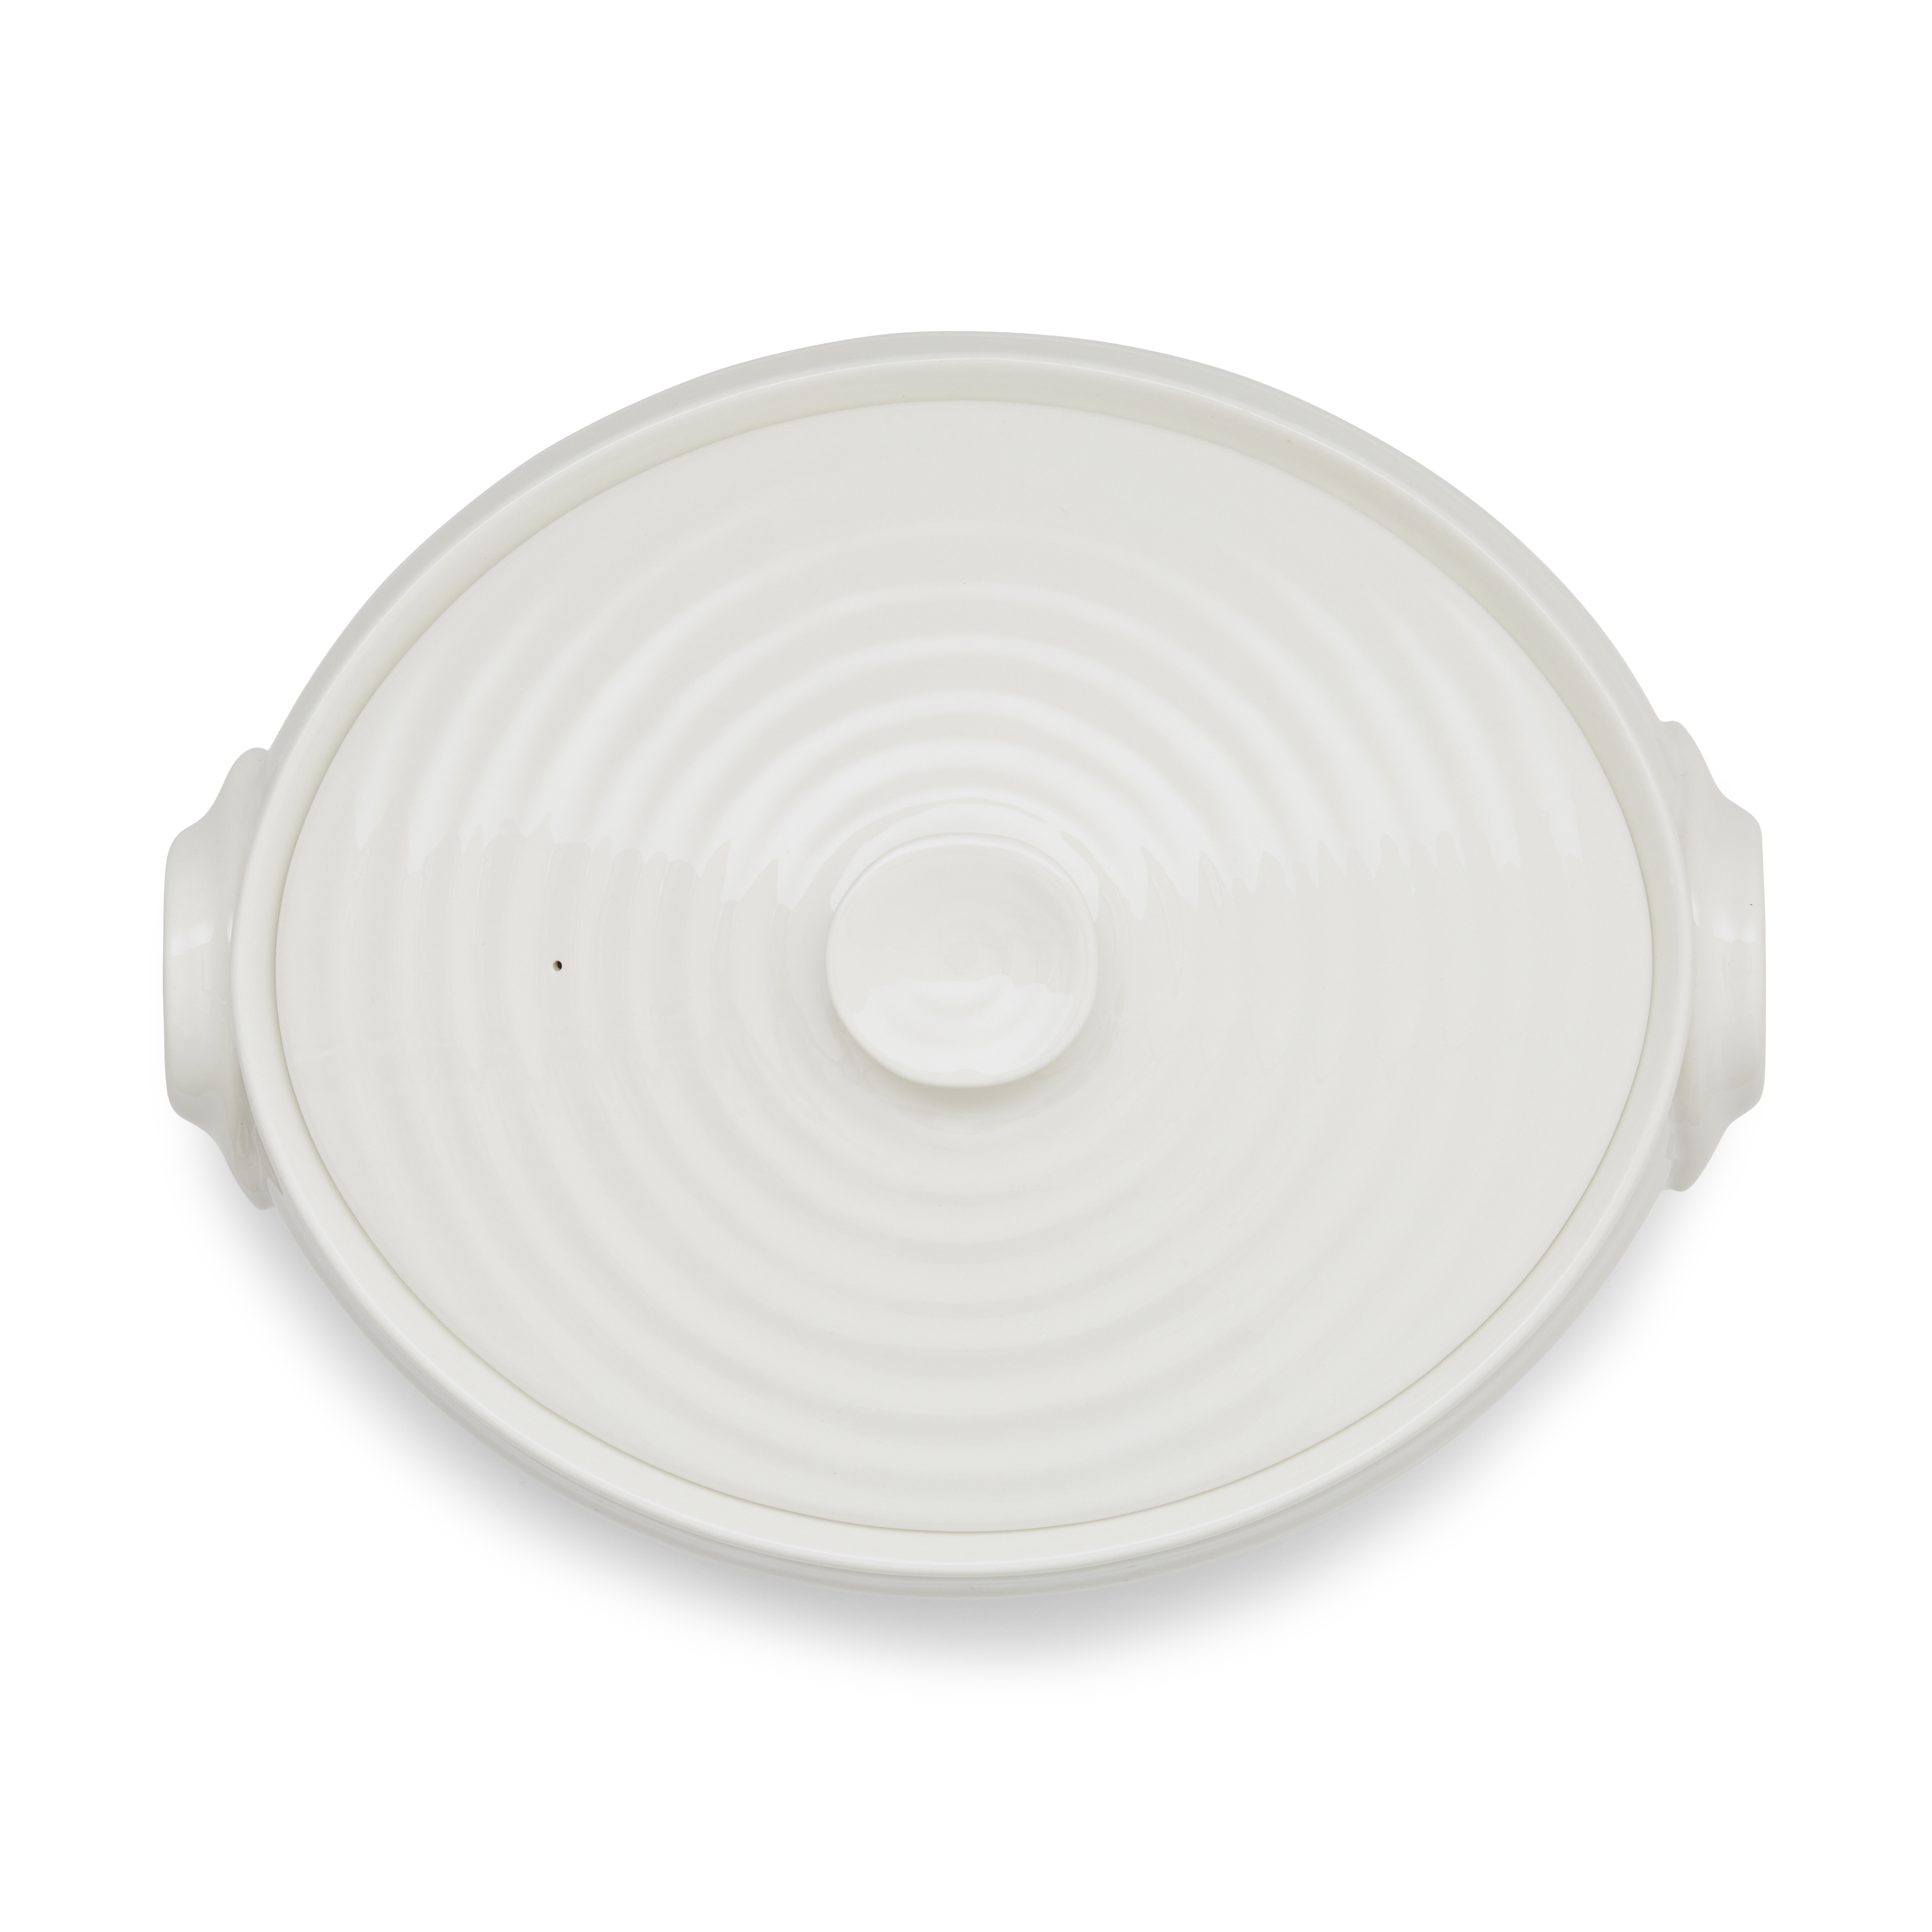 Sophie Conran Small Oval Casserole image number null